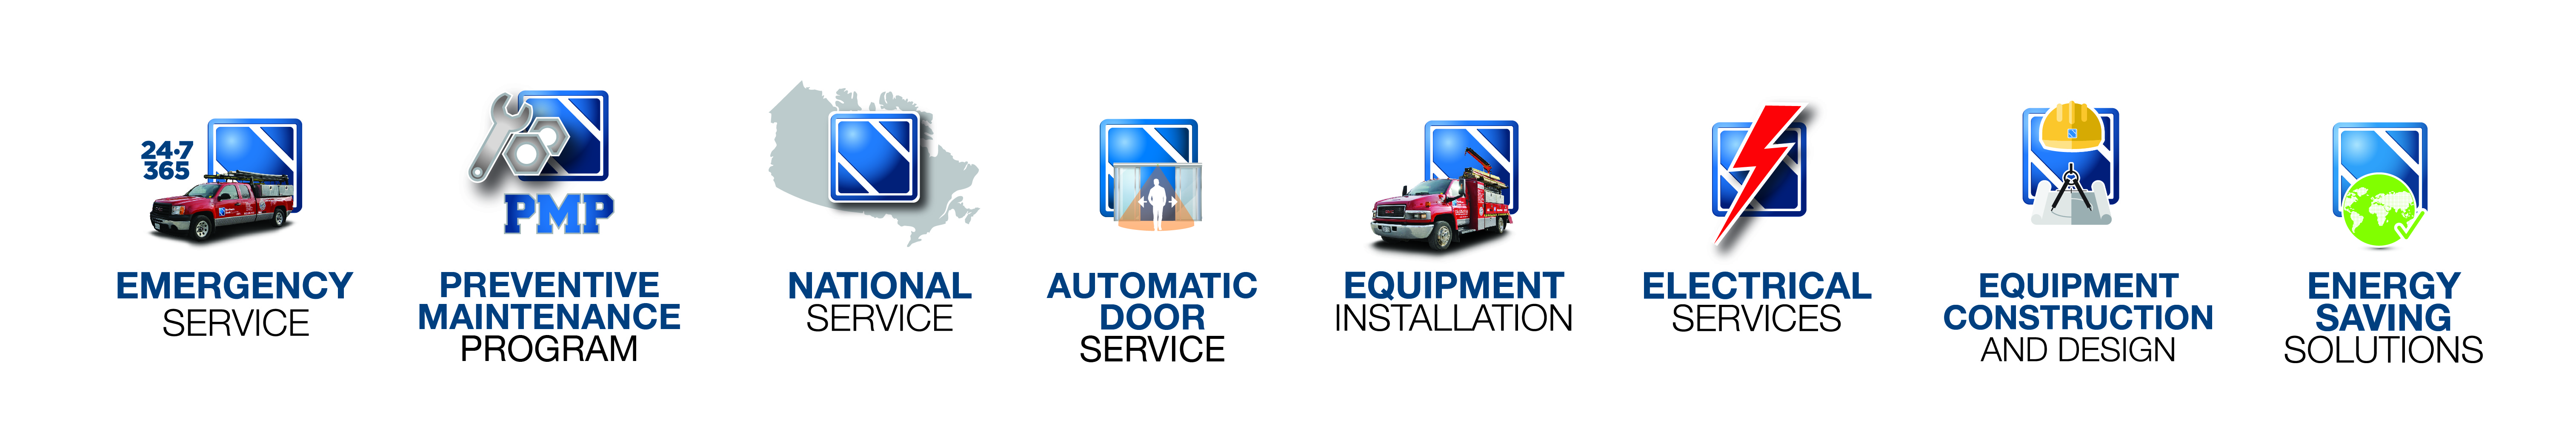 NDS Services including construction, national service, emergency service, preventative maintenance, equipment installation, electrical services and energy saving solutions